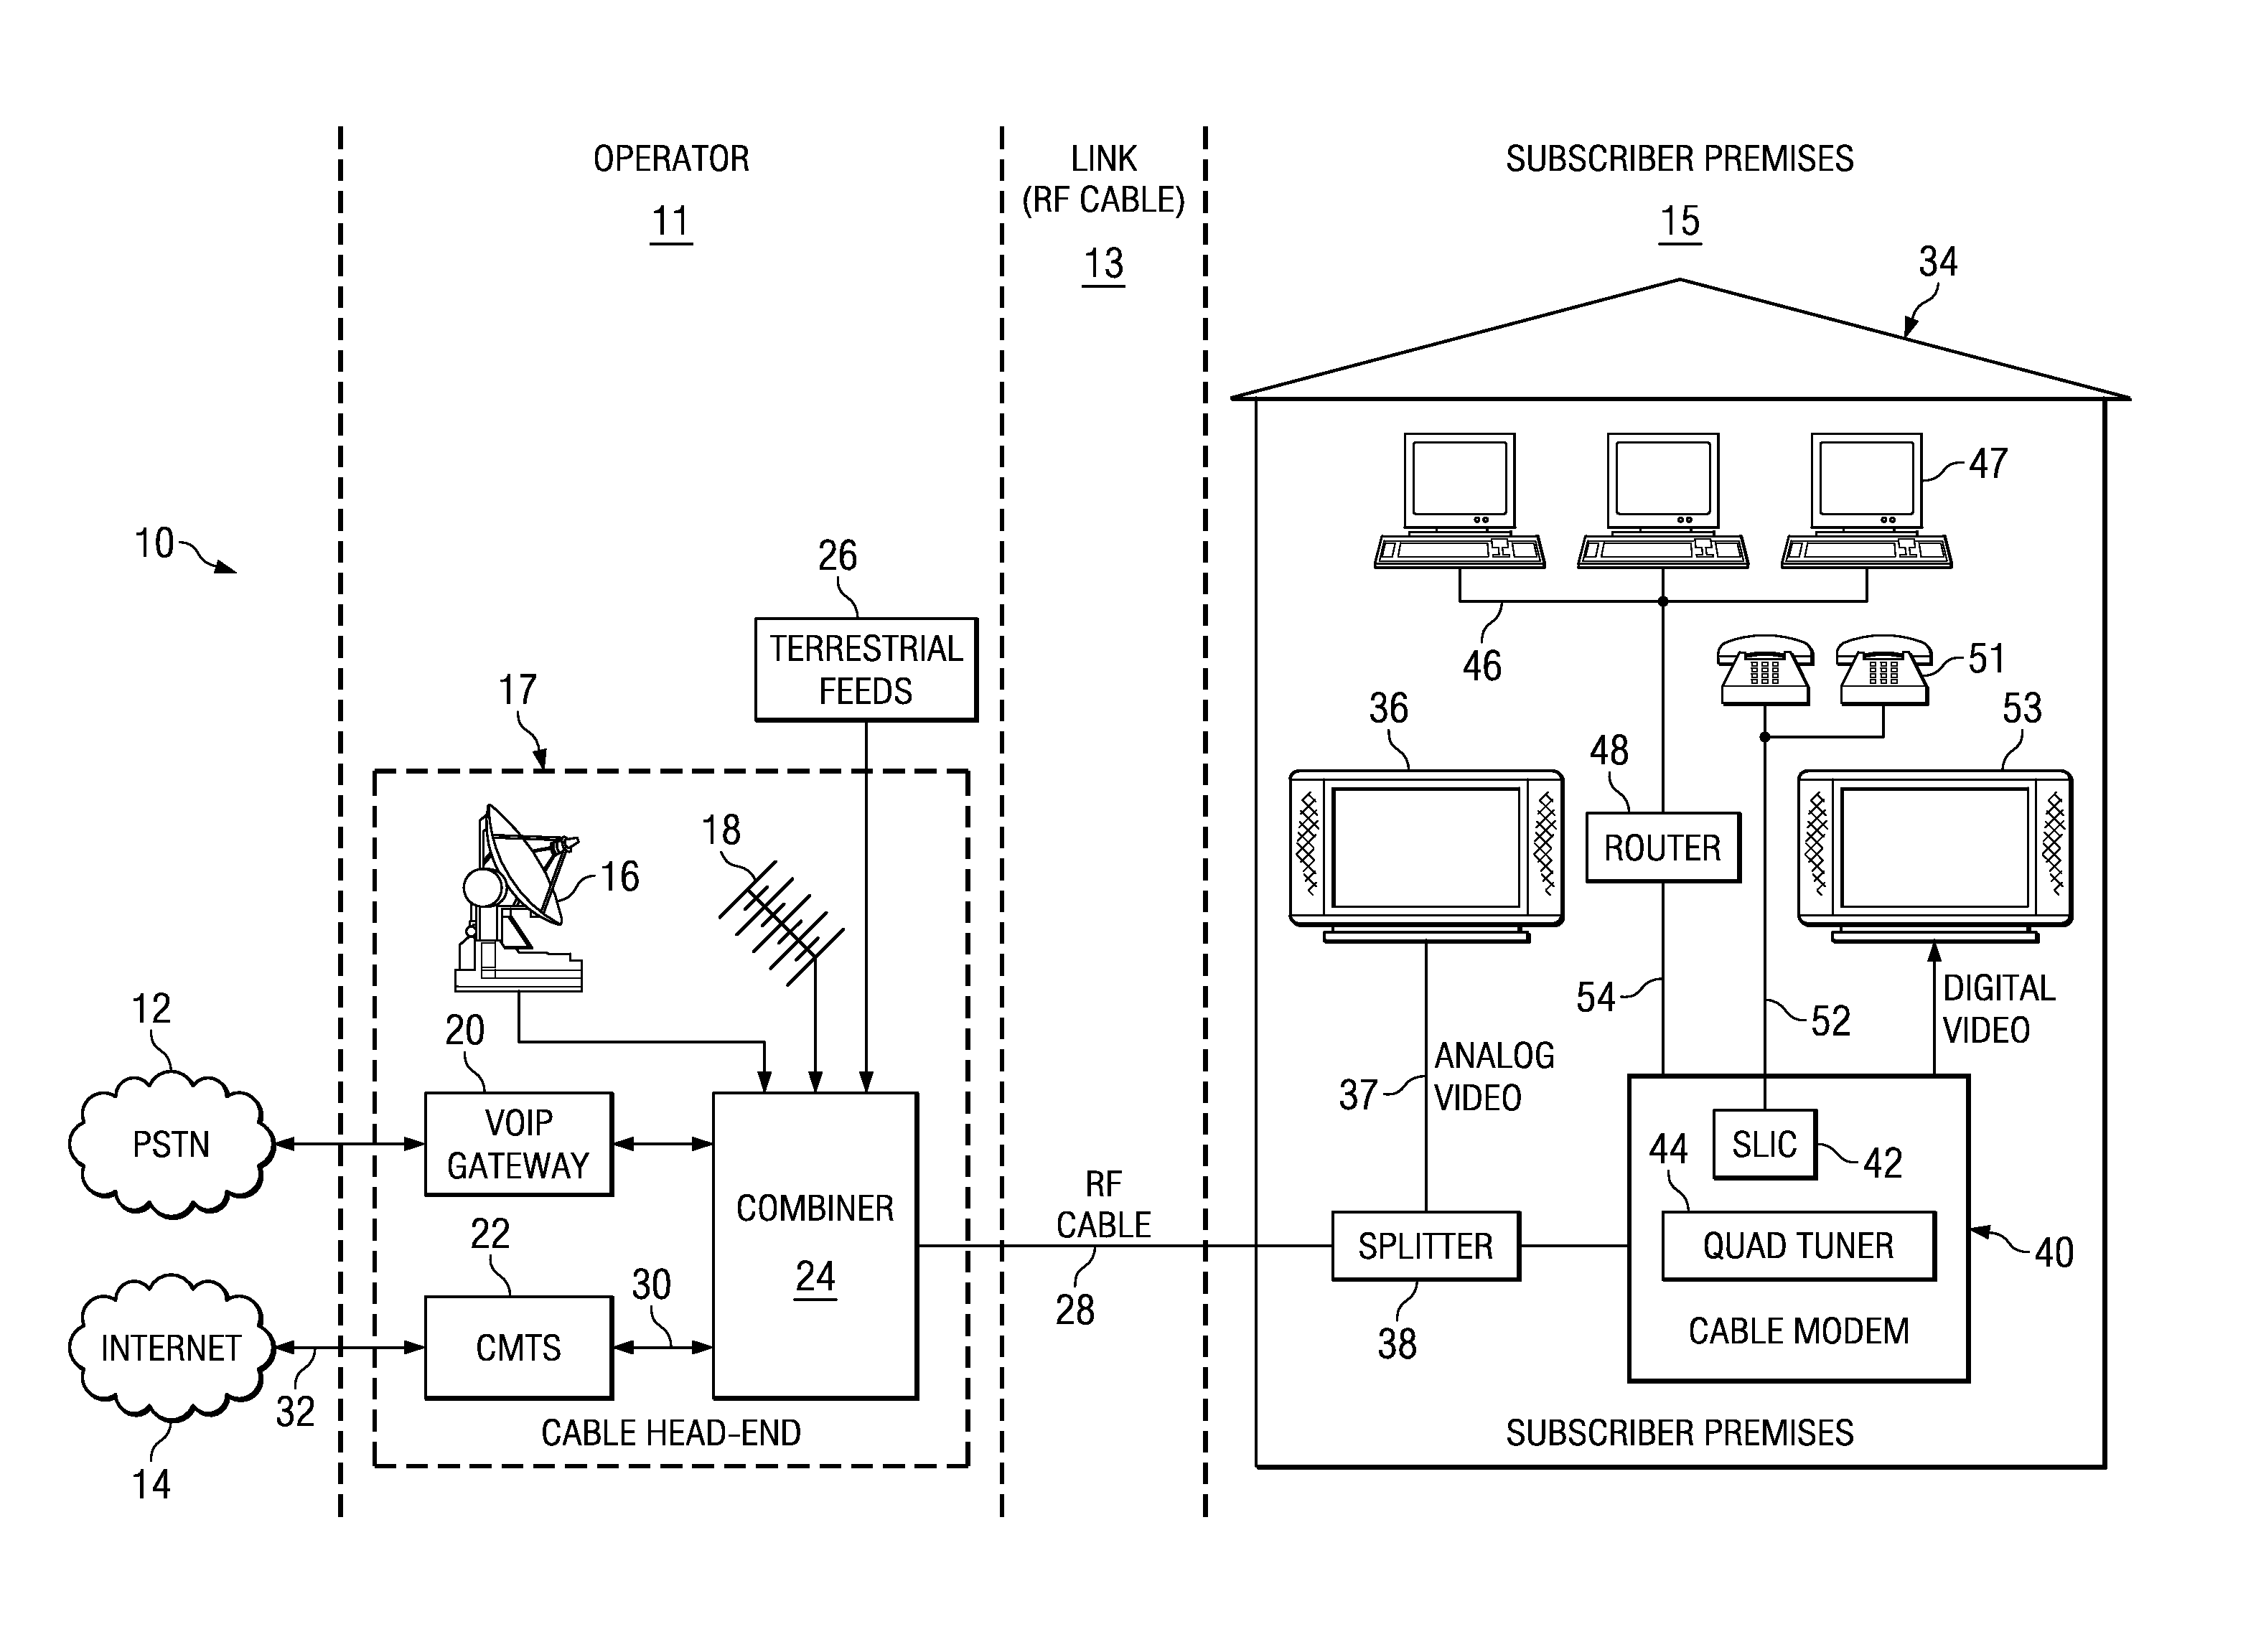 Single chip tuner integrated circuit for use in a cable modem